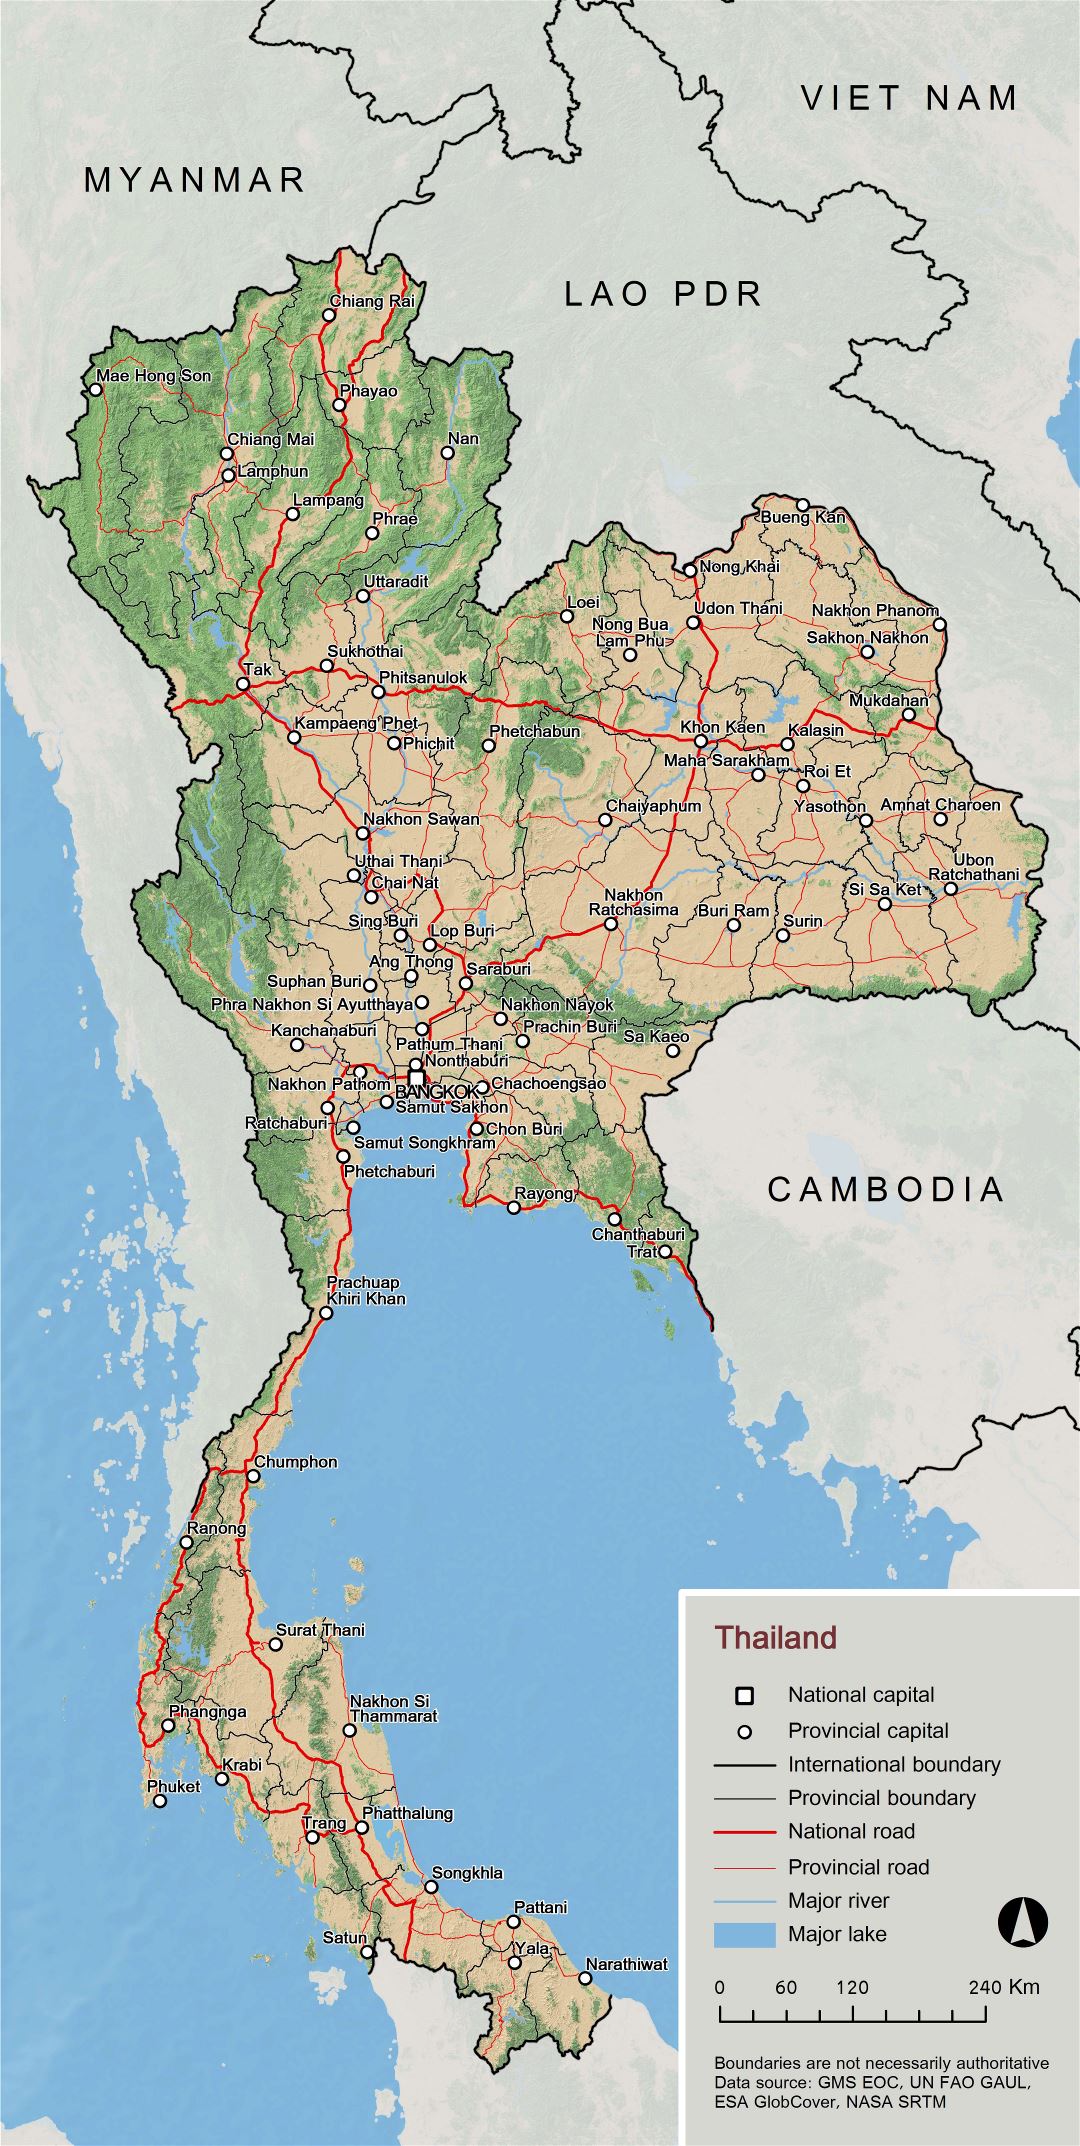 Large scale overview map of Thailand